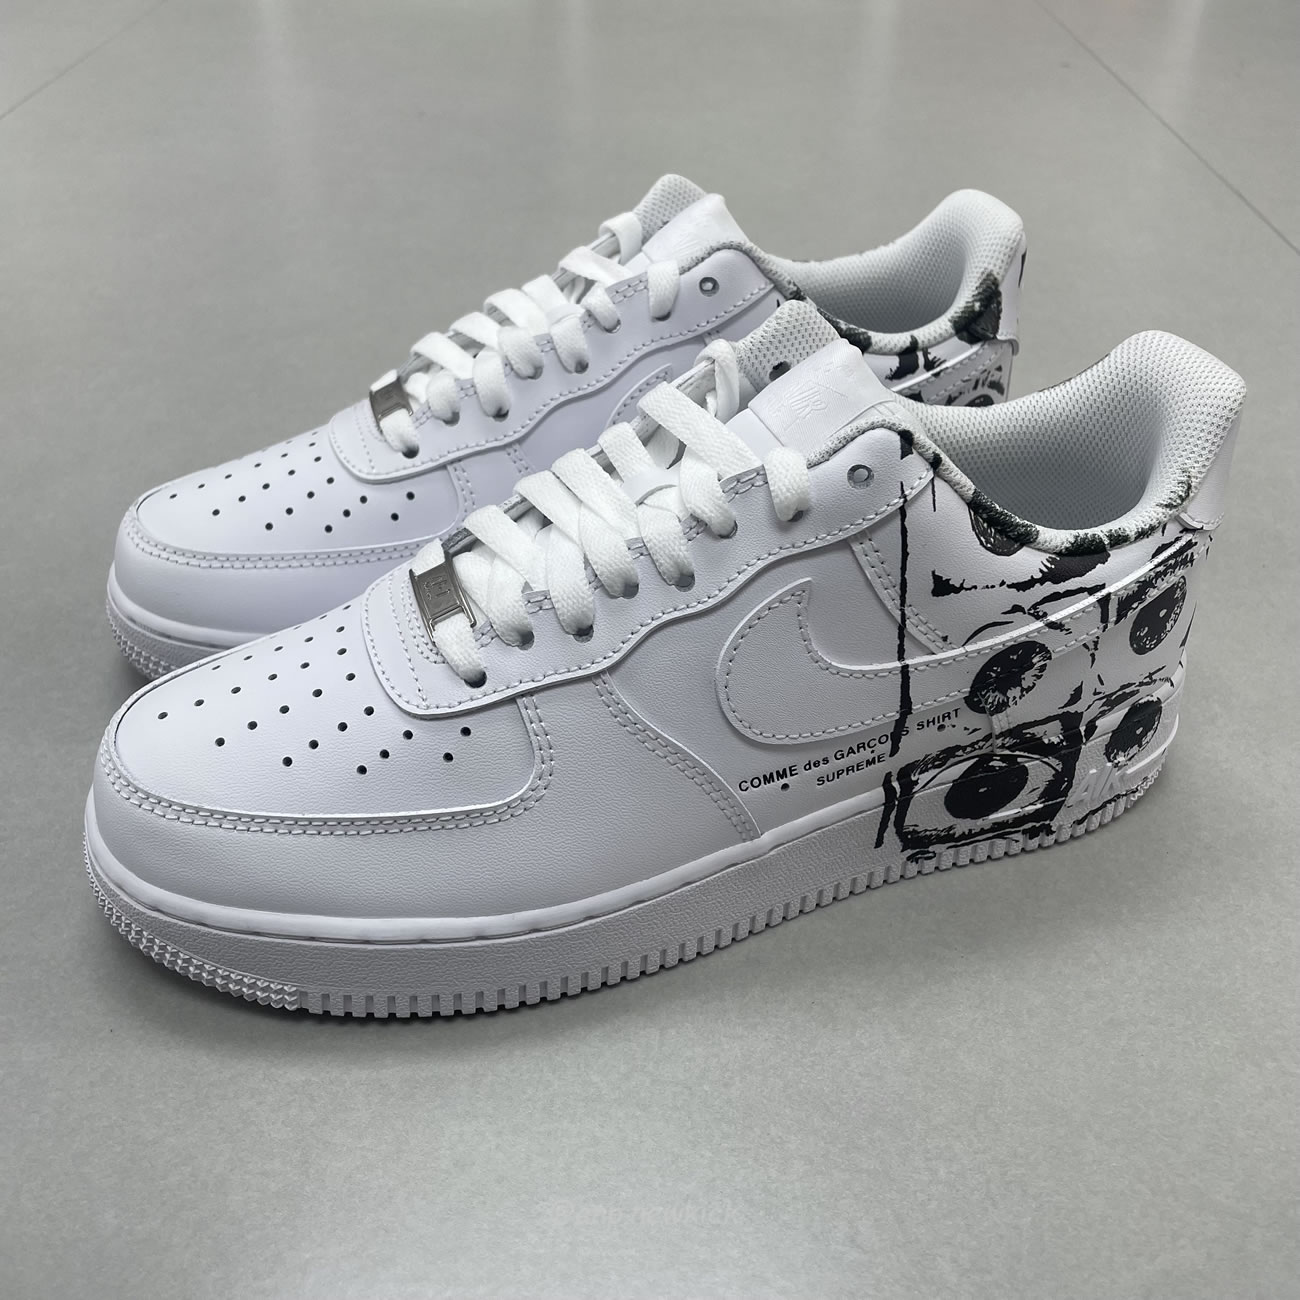 Nike Air Force 1 Low Supreme Comme Des Garcons 923044 100 (7) - newkick.org